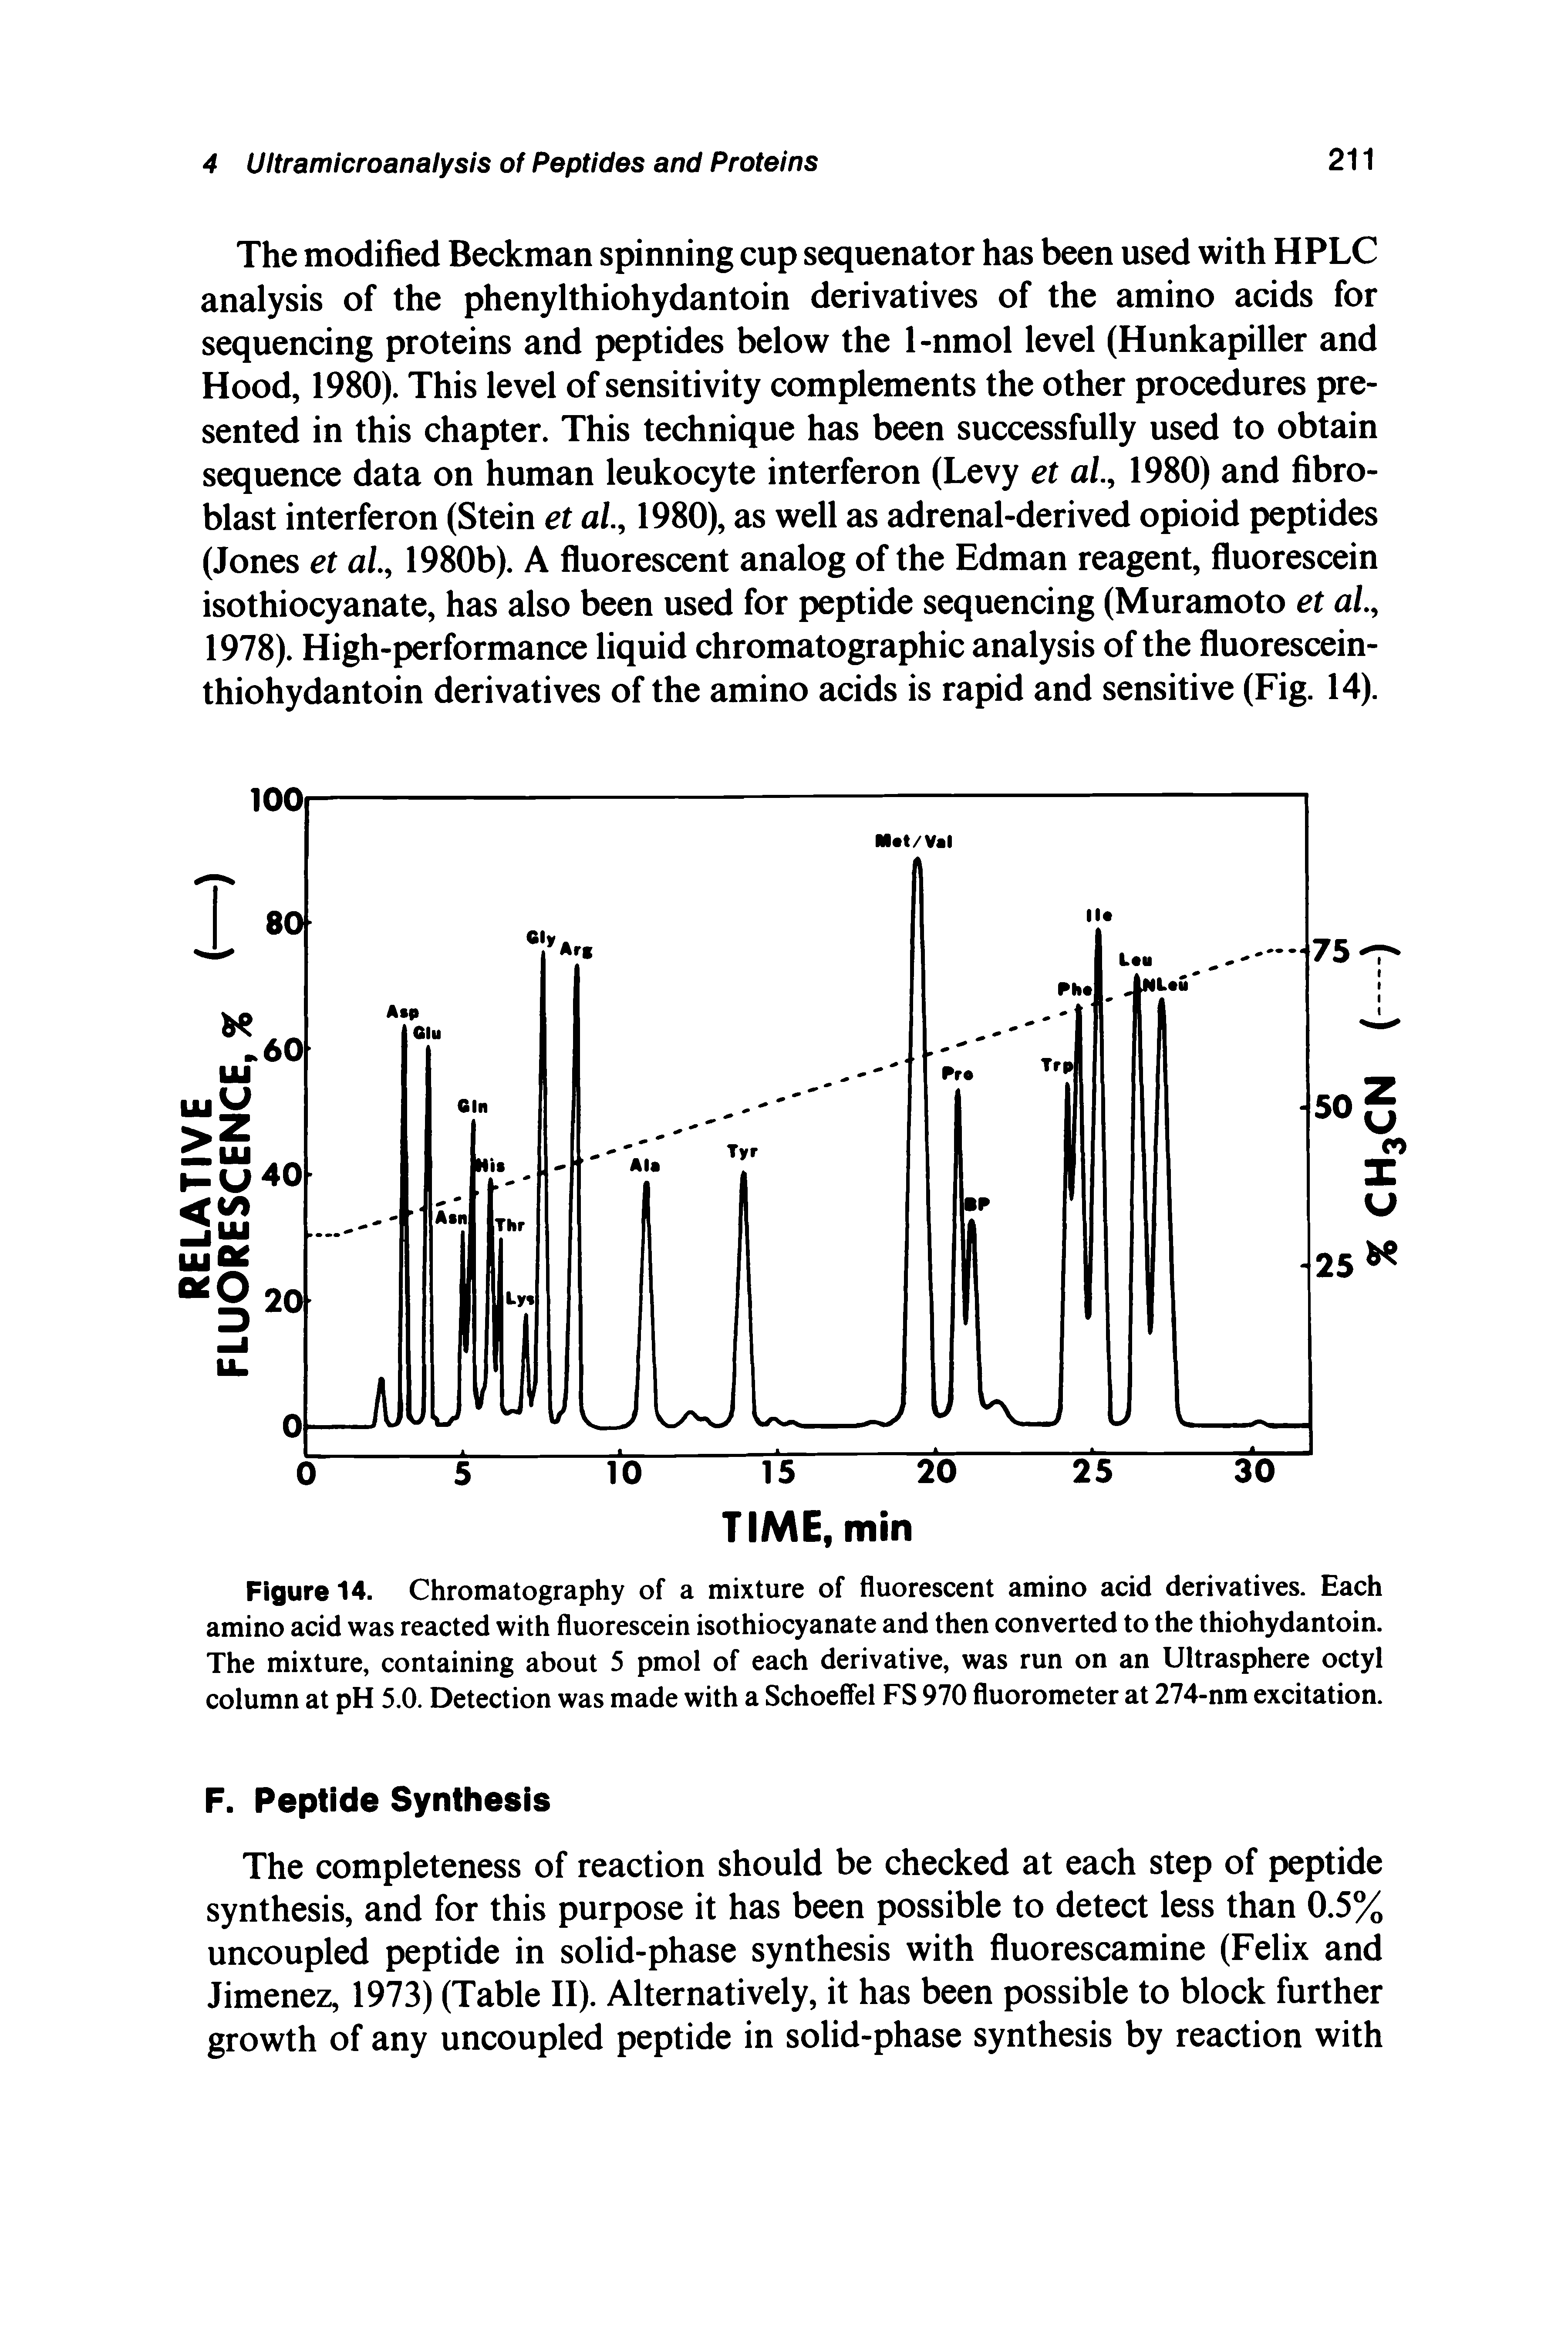 Figure 14. Chromatography of a mixture of fluorescent amino acid derivatives. Each amino acid was reacted with fluorescein isothiocyanate and then converted to the thiohydantoin. The mixture, containing about 5 pmol of each derivative, was run on an Ultrasphere octyl column at pH 5.0. Detection was made with a Schoeflel FS 970 fluorometer at 274-nm excitation.